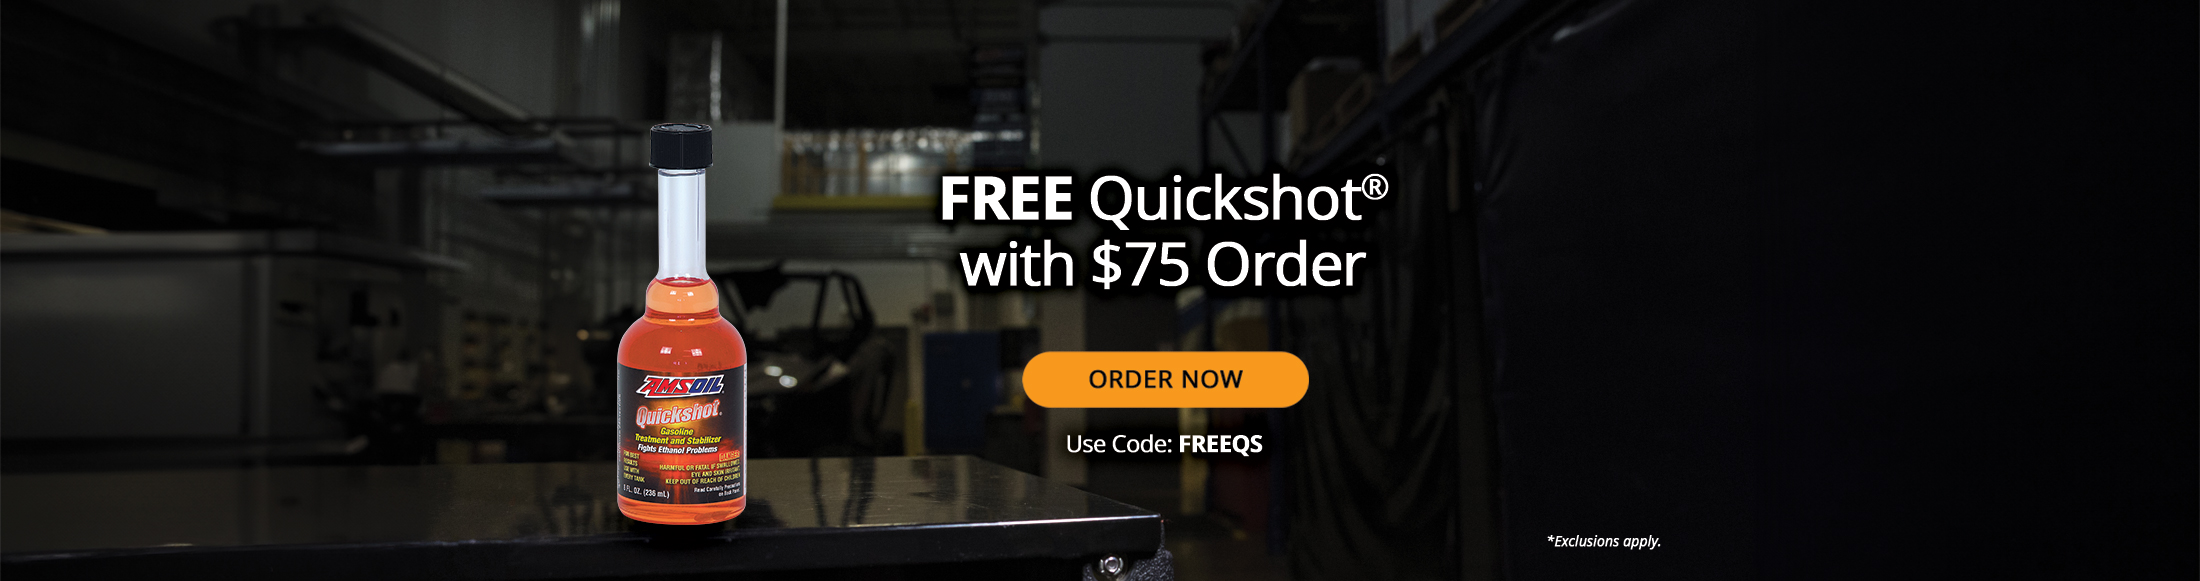 Free Quickshot with $75 order. Order now. Use Code: FREEQS. *Exclusions apply.